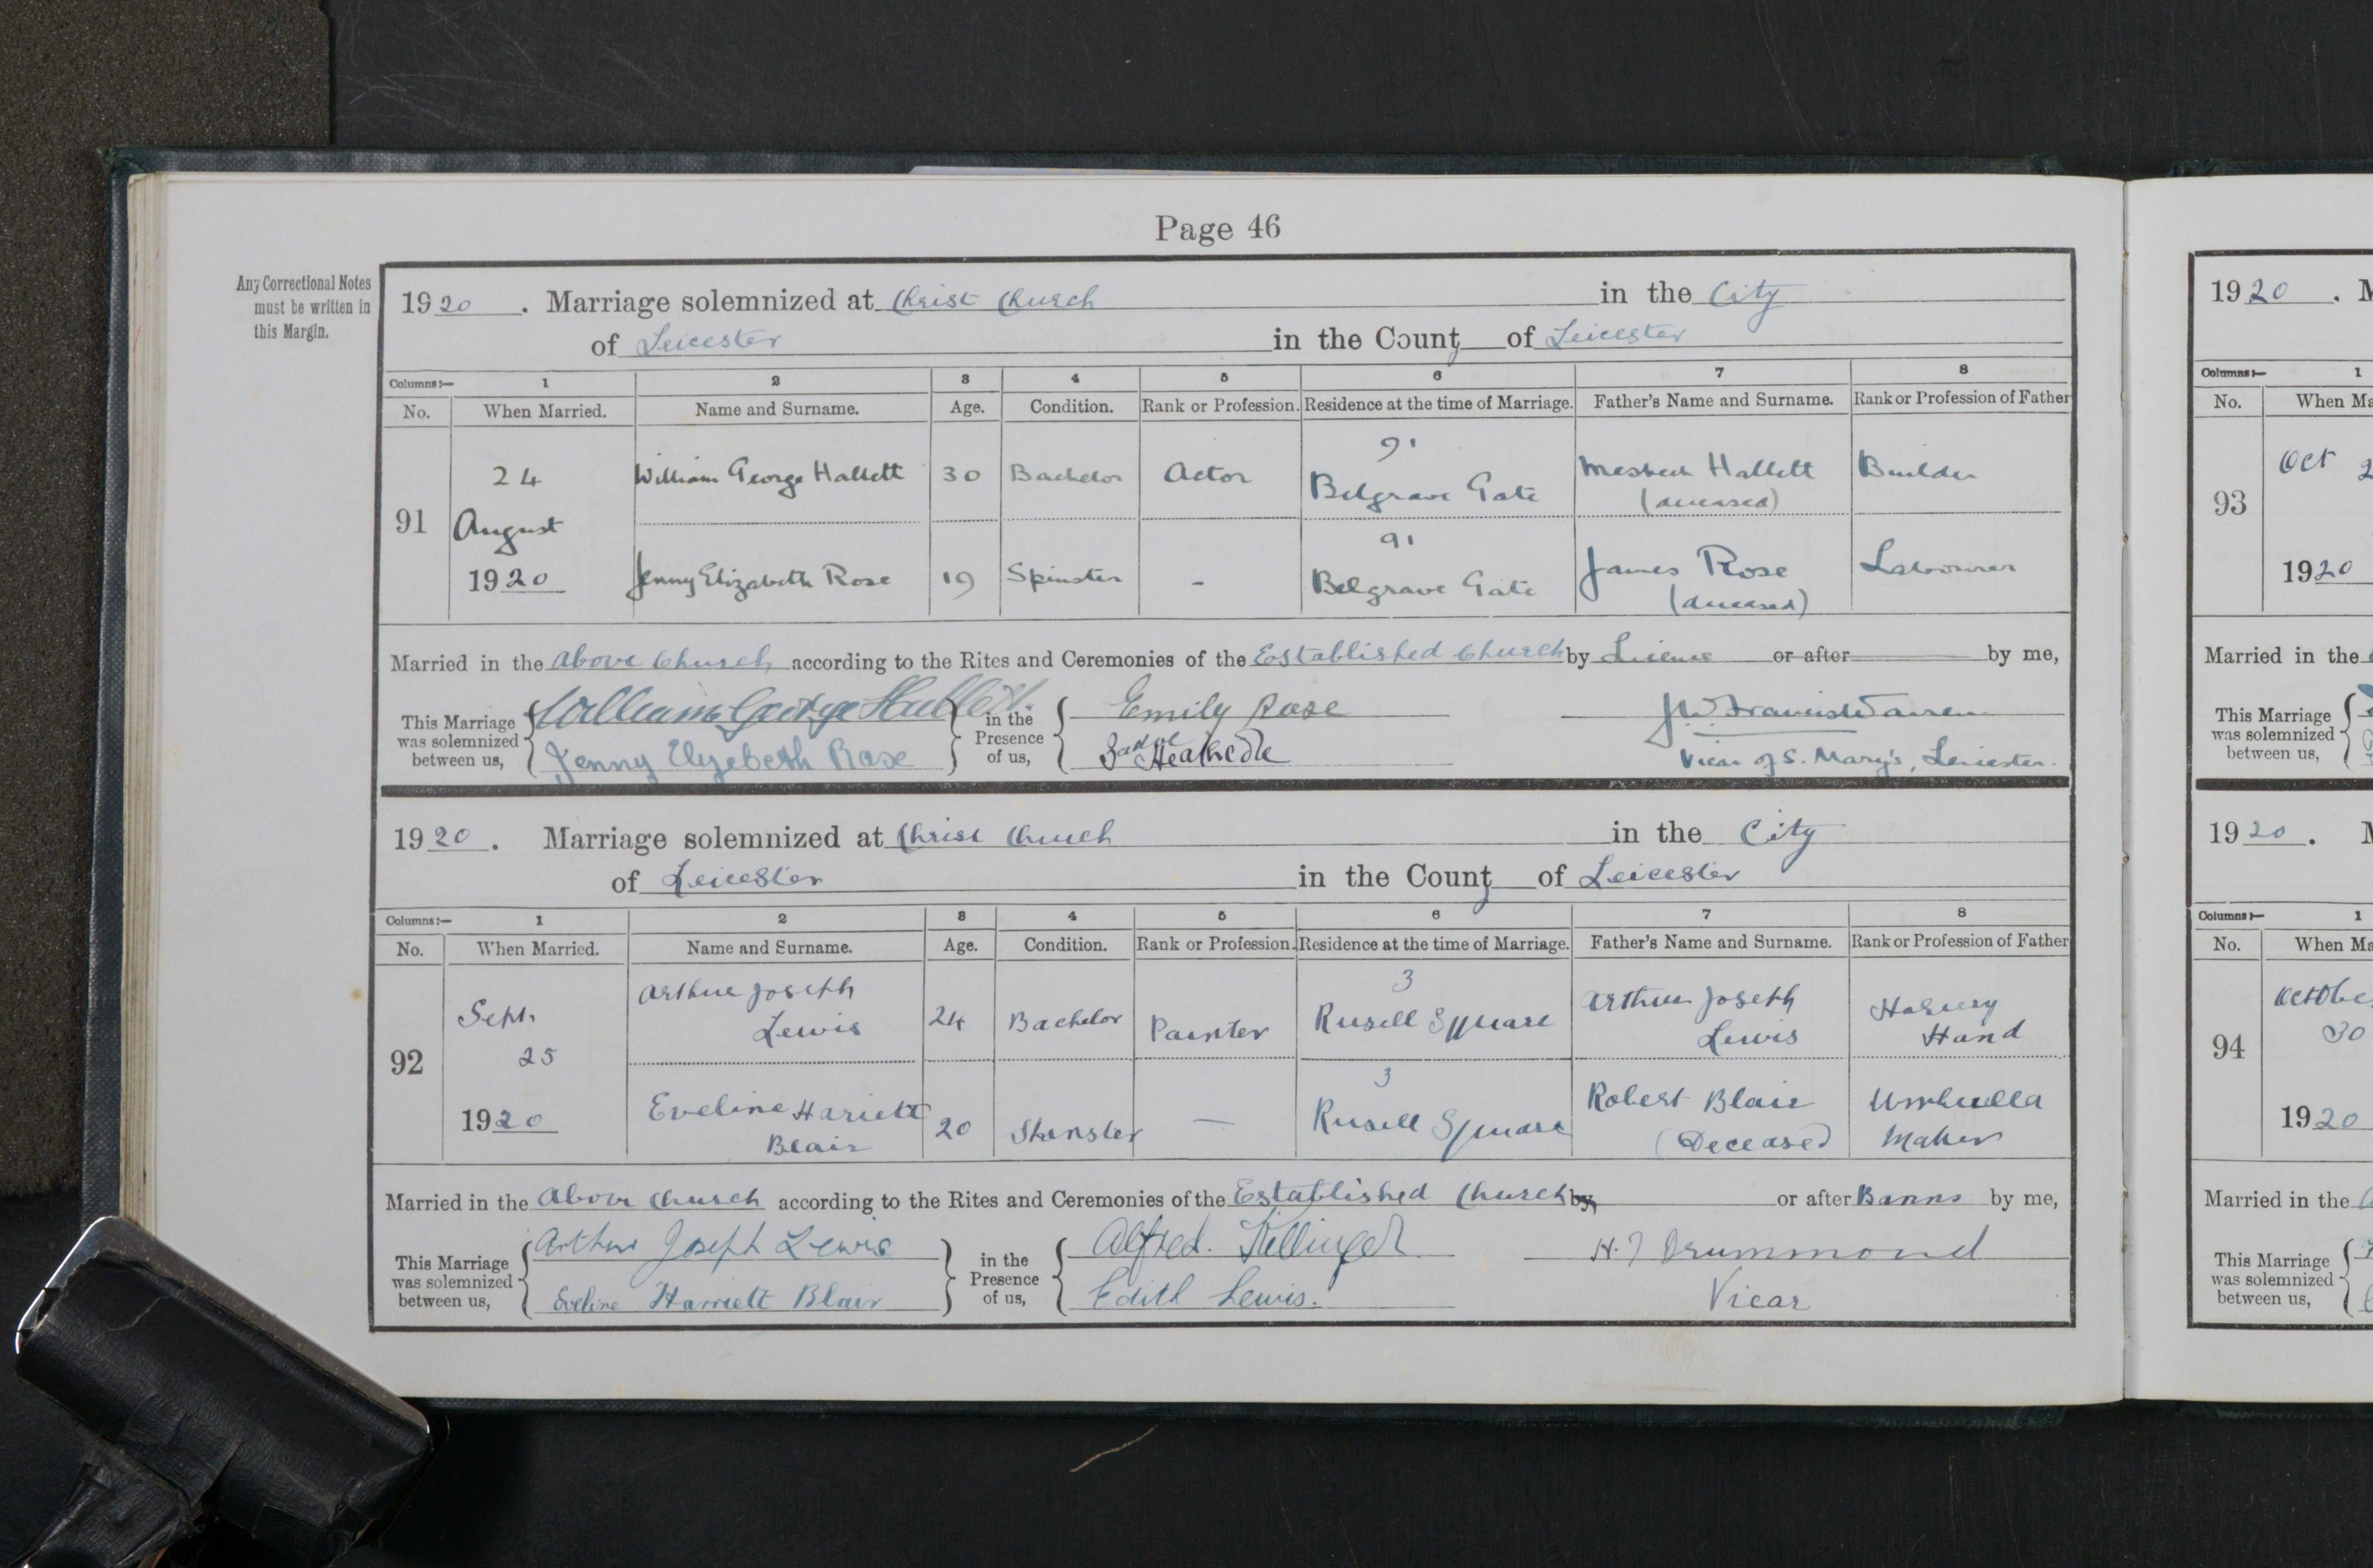 1920 marriage of Harriet Eveline Blair to Alfred Joseph Lewis